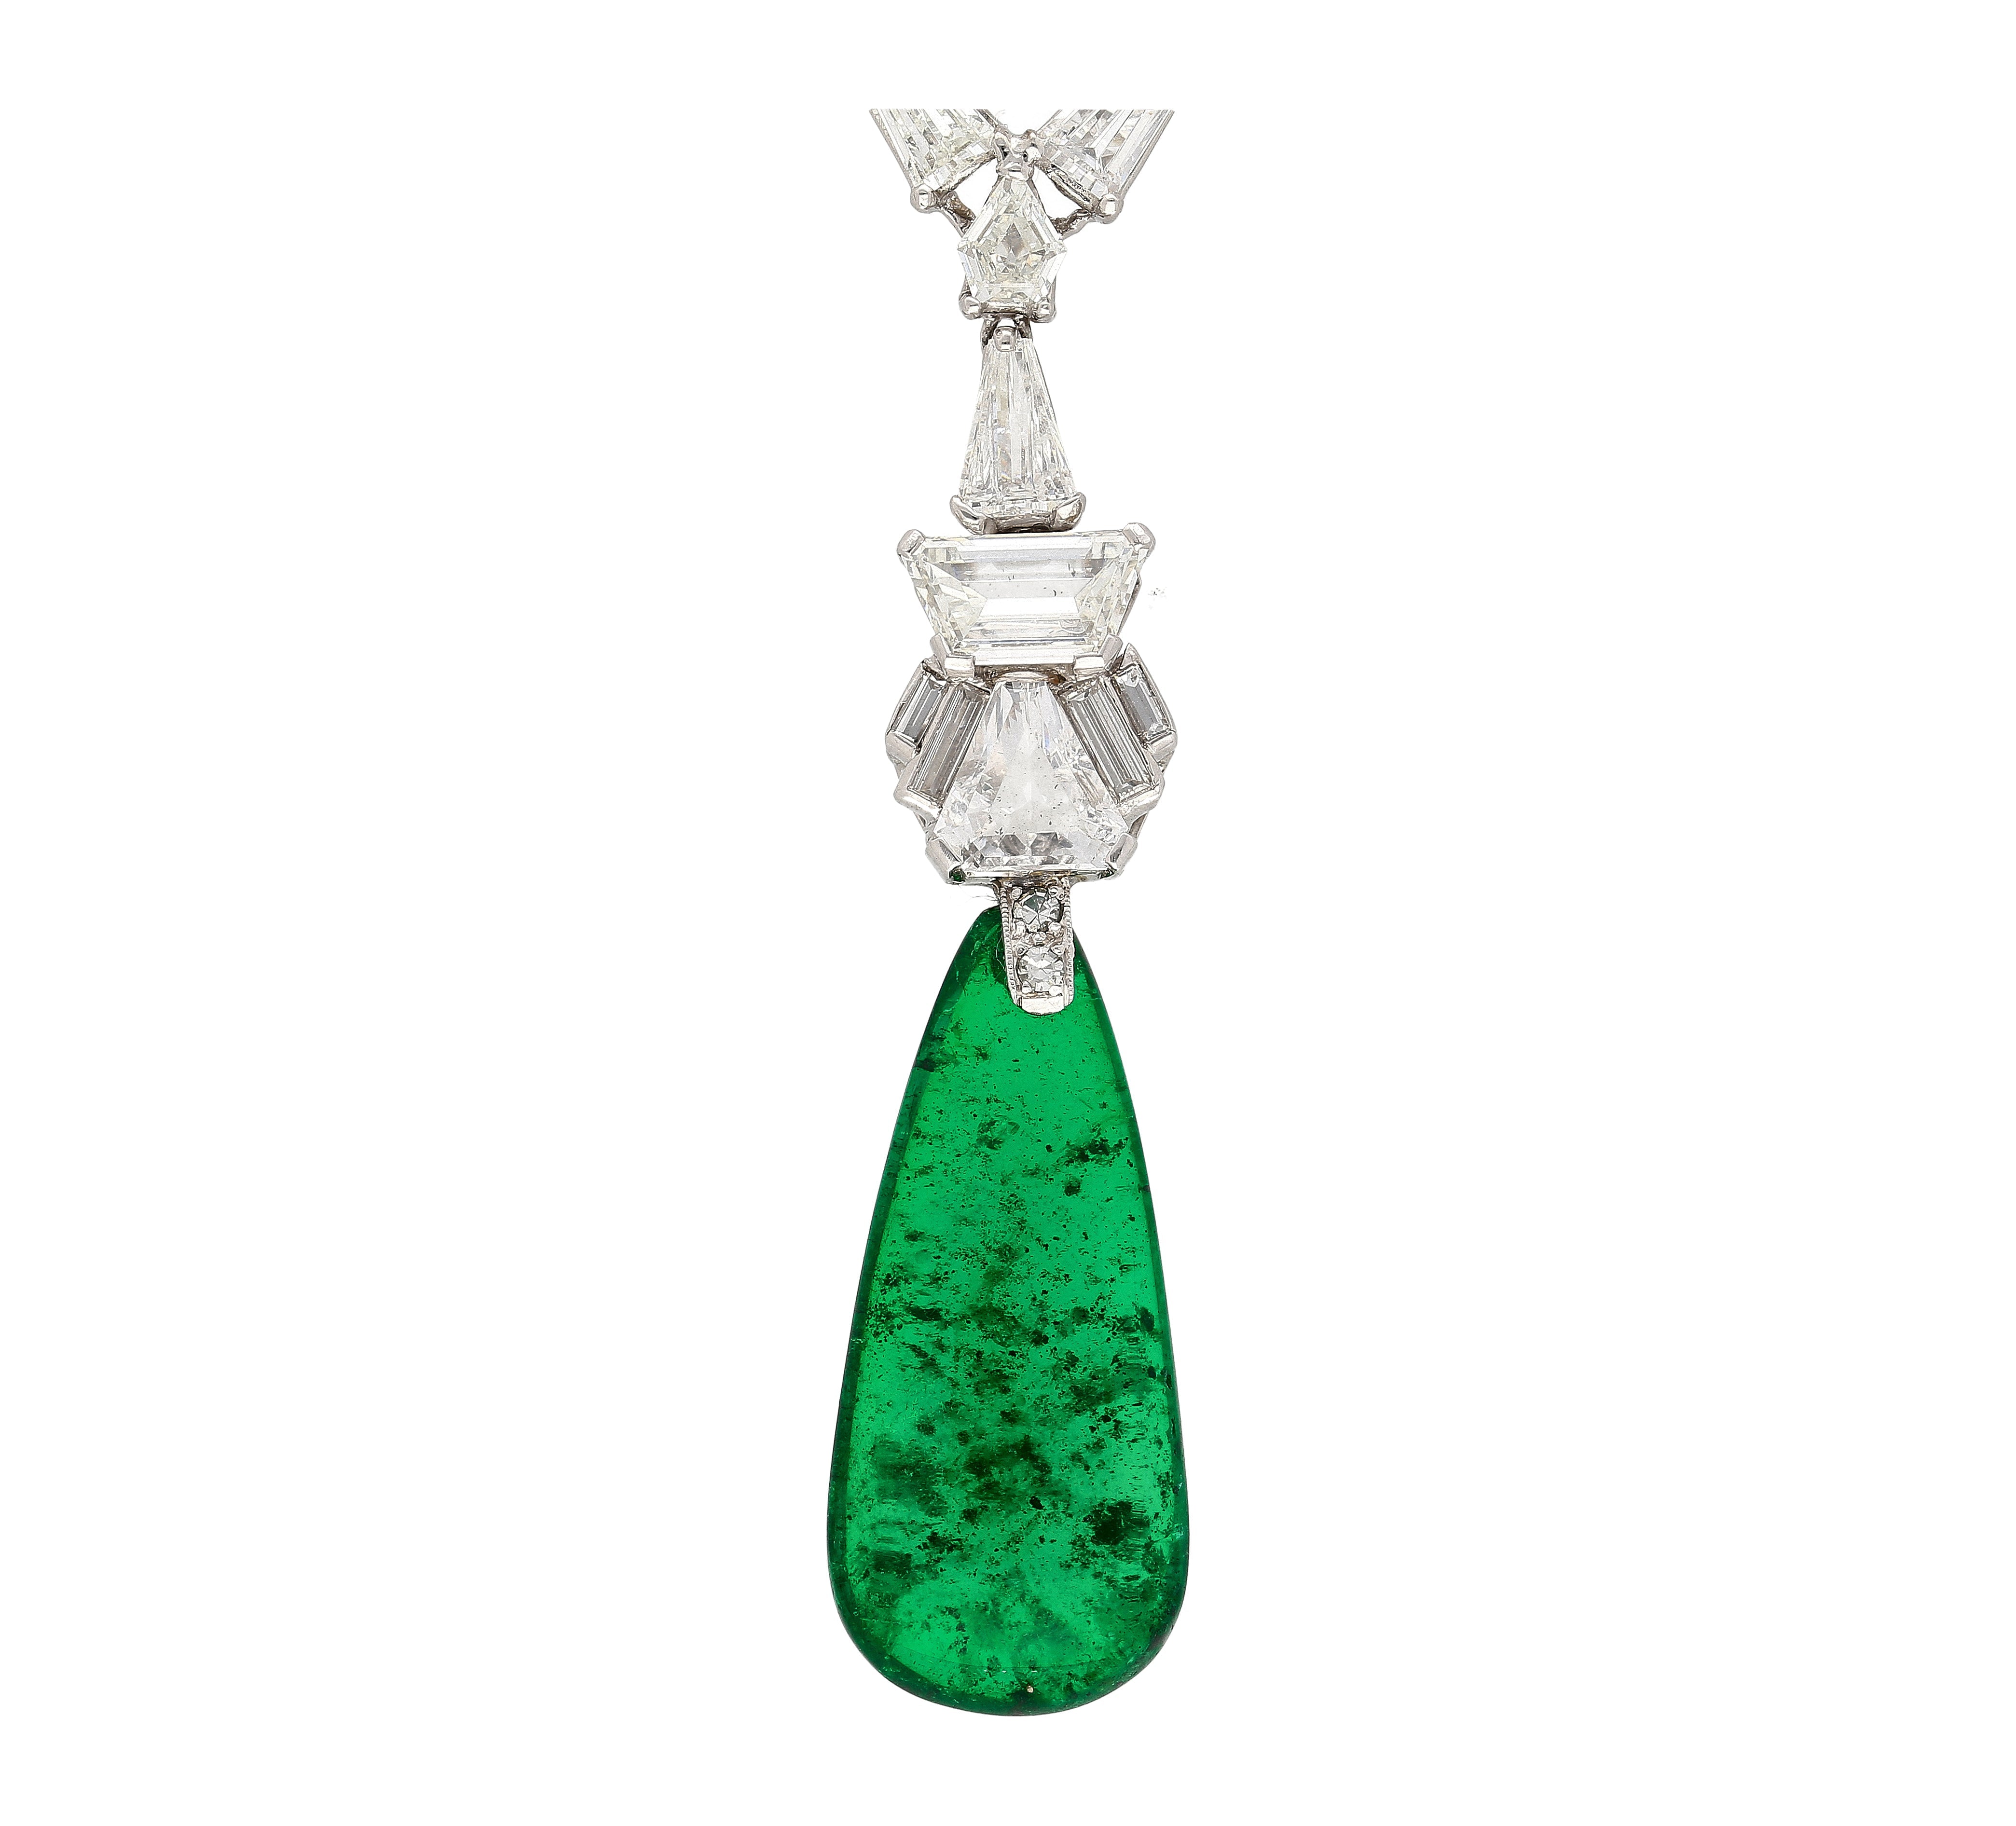 17-Carat-Old-Mine-Insignificant-Oil-Colombian-Drop-Emerald-Diamond-18K-Gold-Necklace-Necklaces.jpg